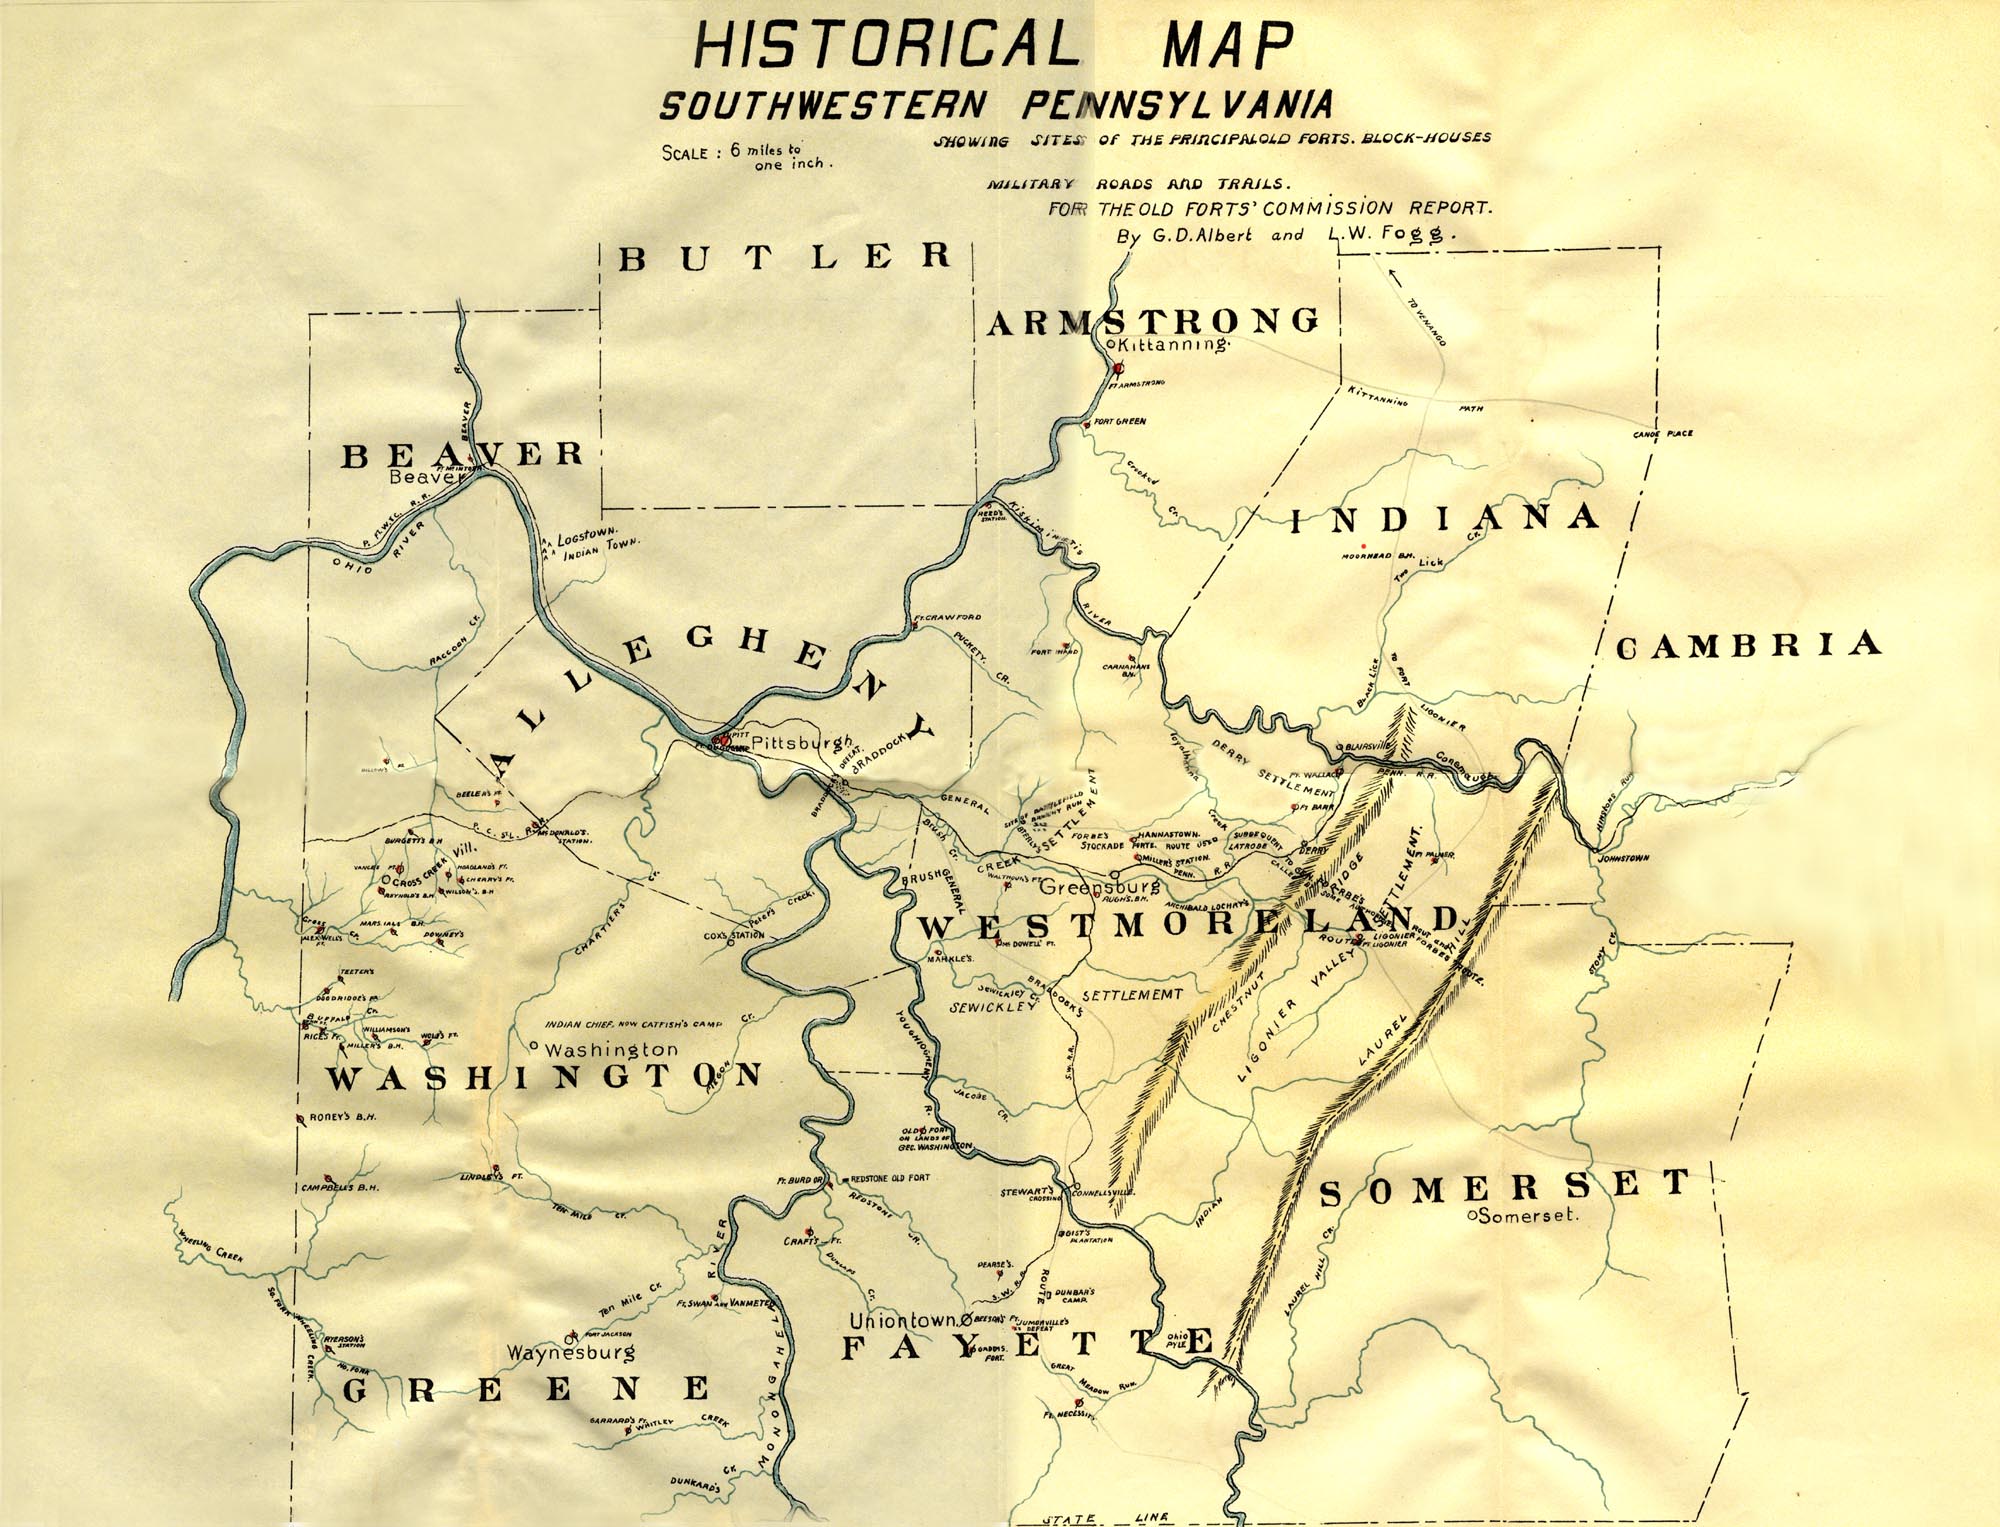 Kittanning in Top Central part of map - under the County Name of Armstrong